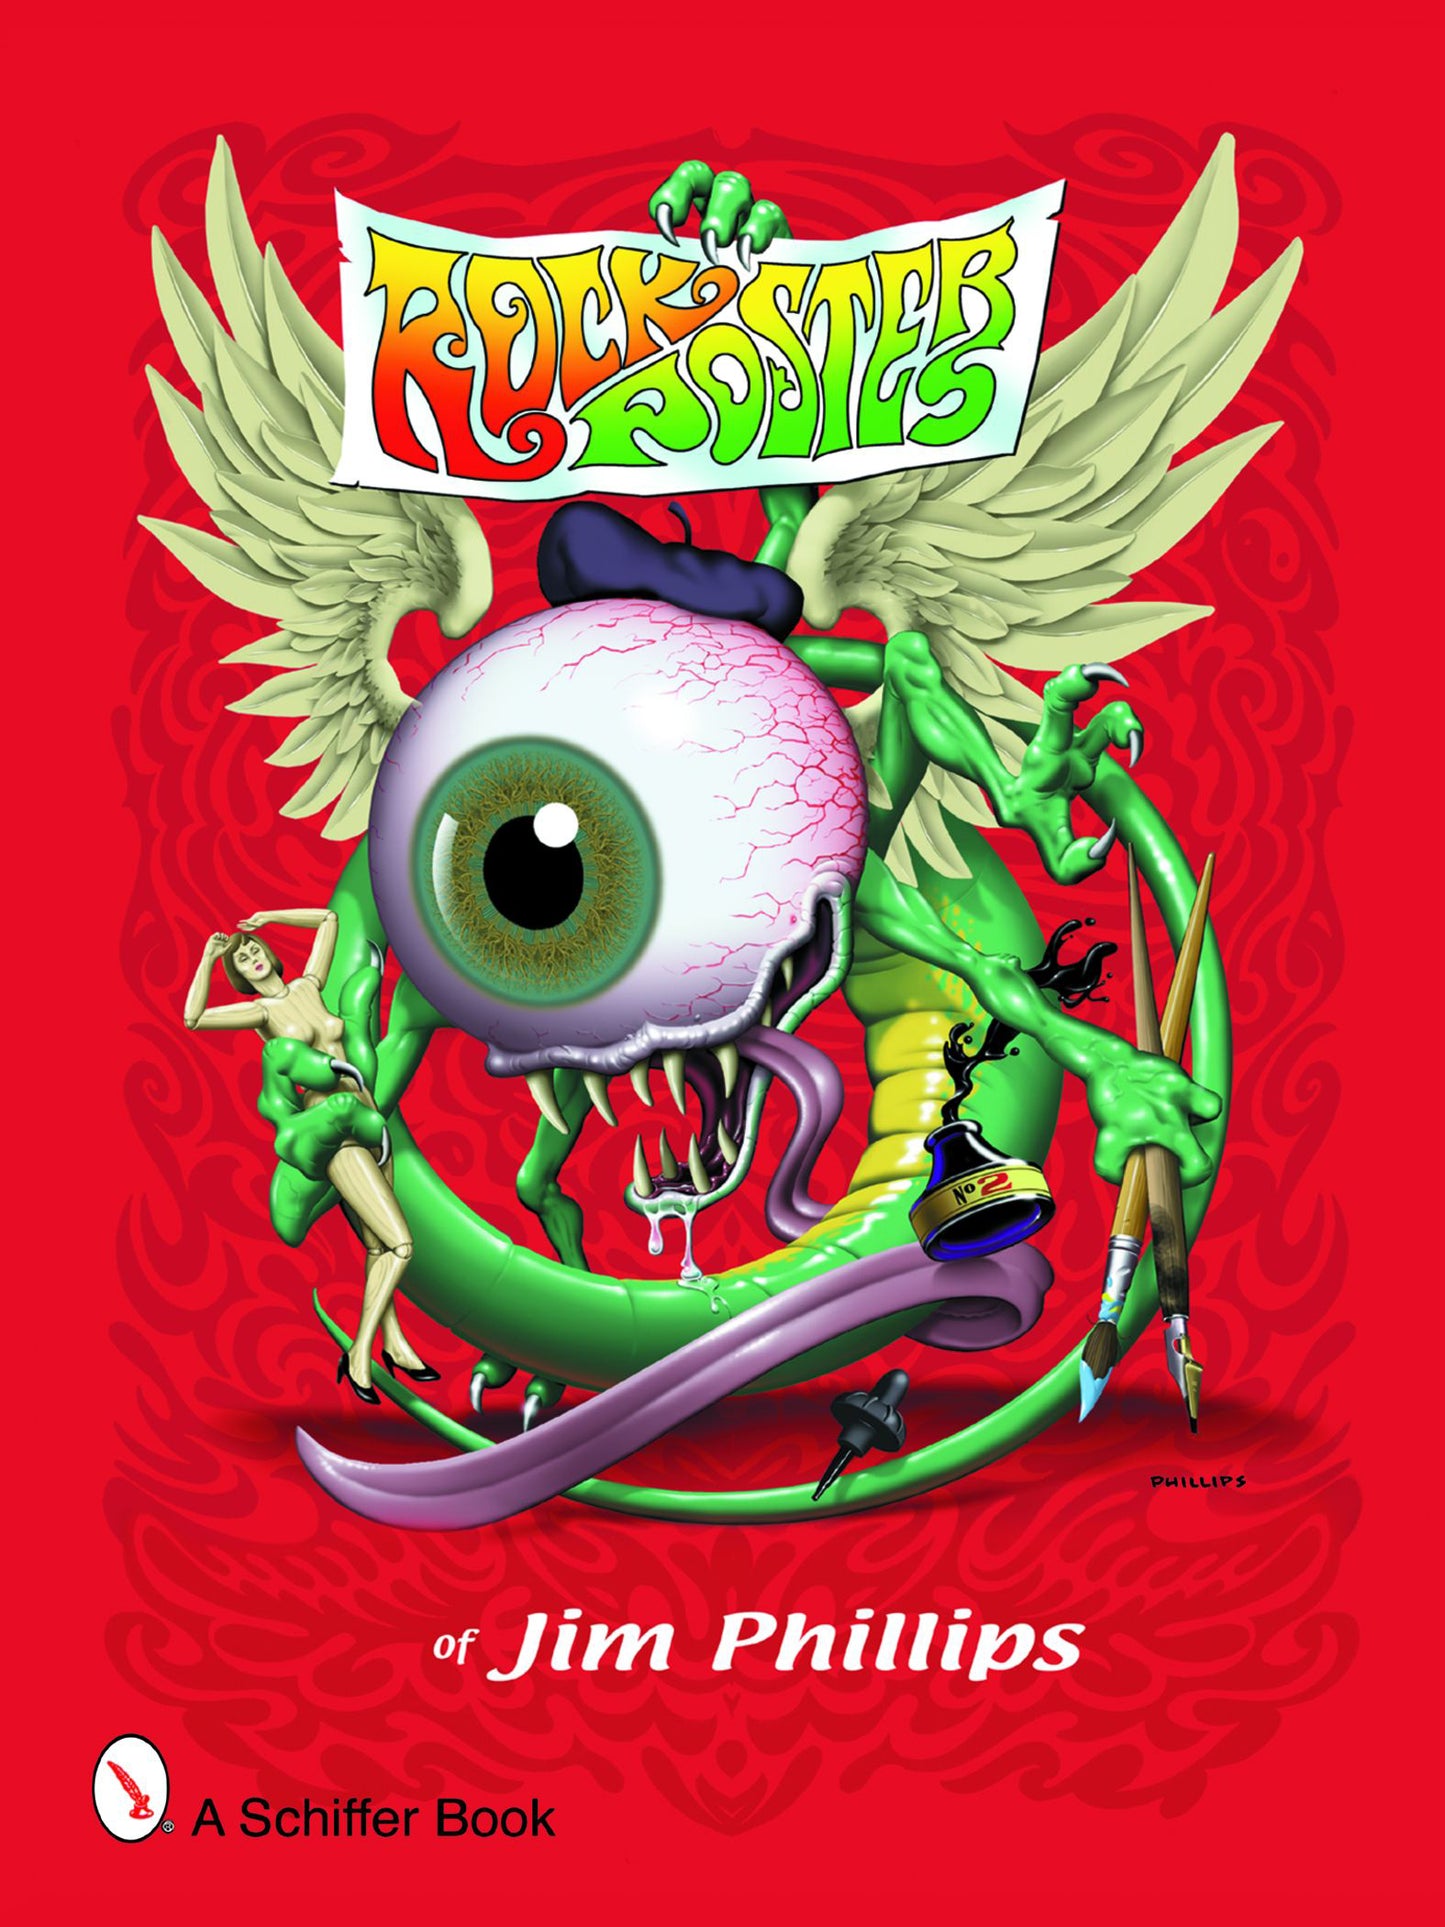 Jim Phillips Books - Wholesale - Mix and Match (15 count)